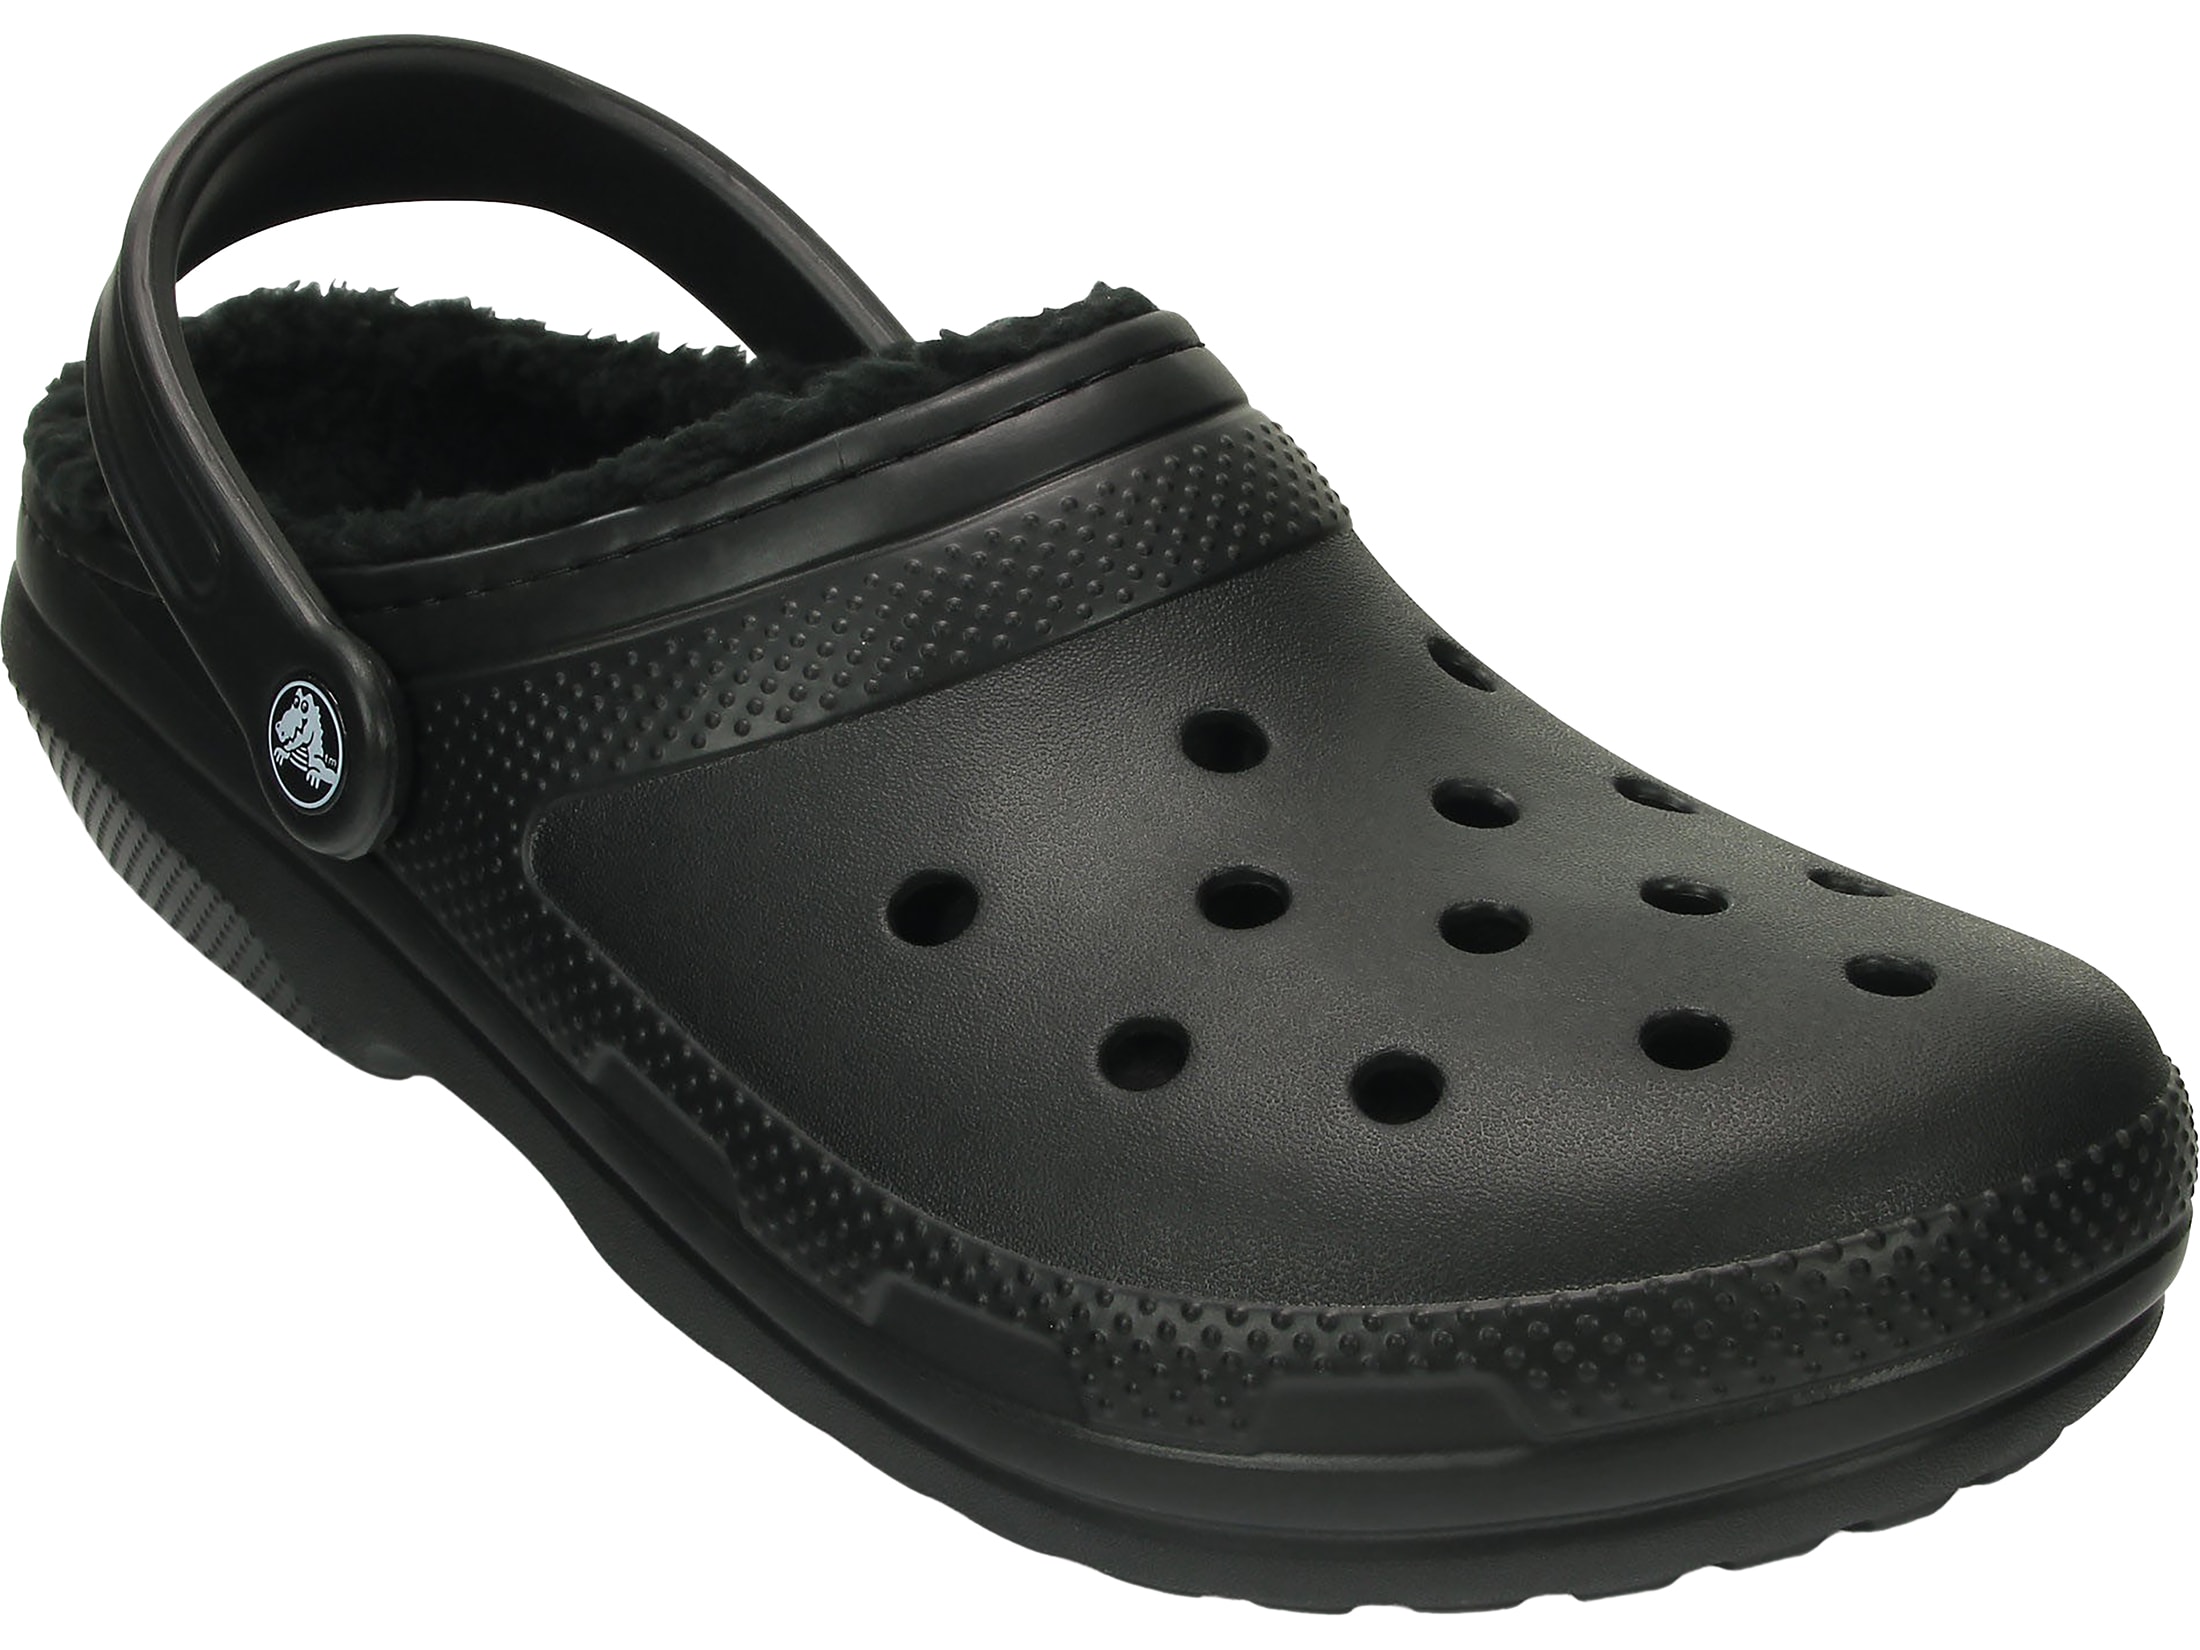 Crocs Classic Lined Insulated Clogs Synthetic Black Men's 14 D